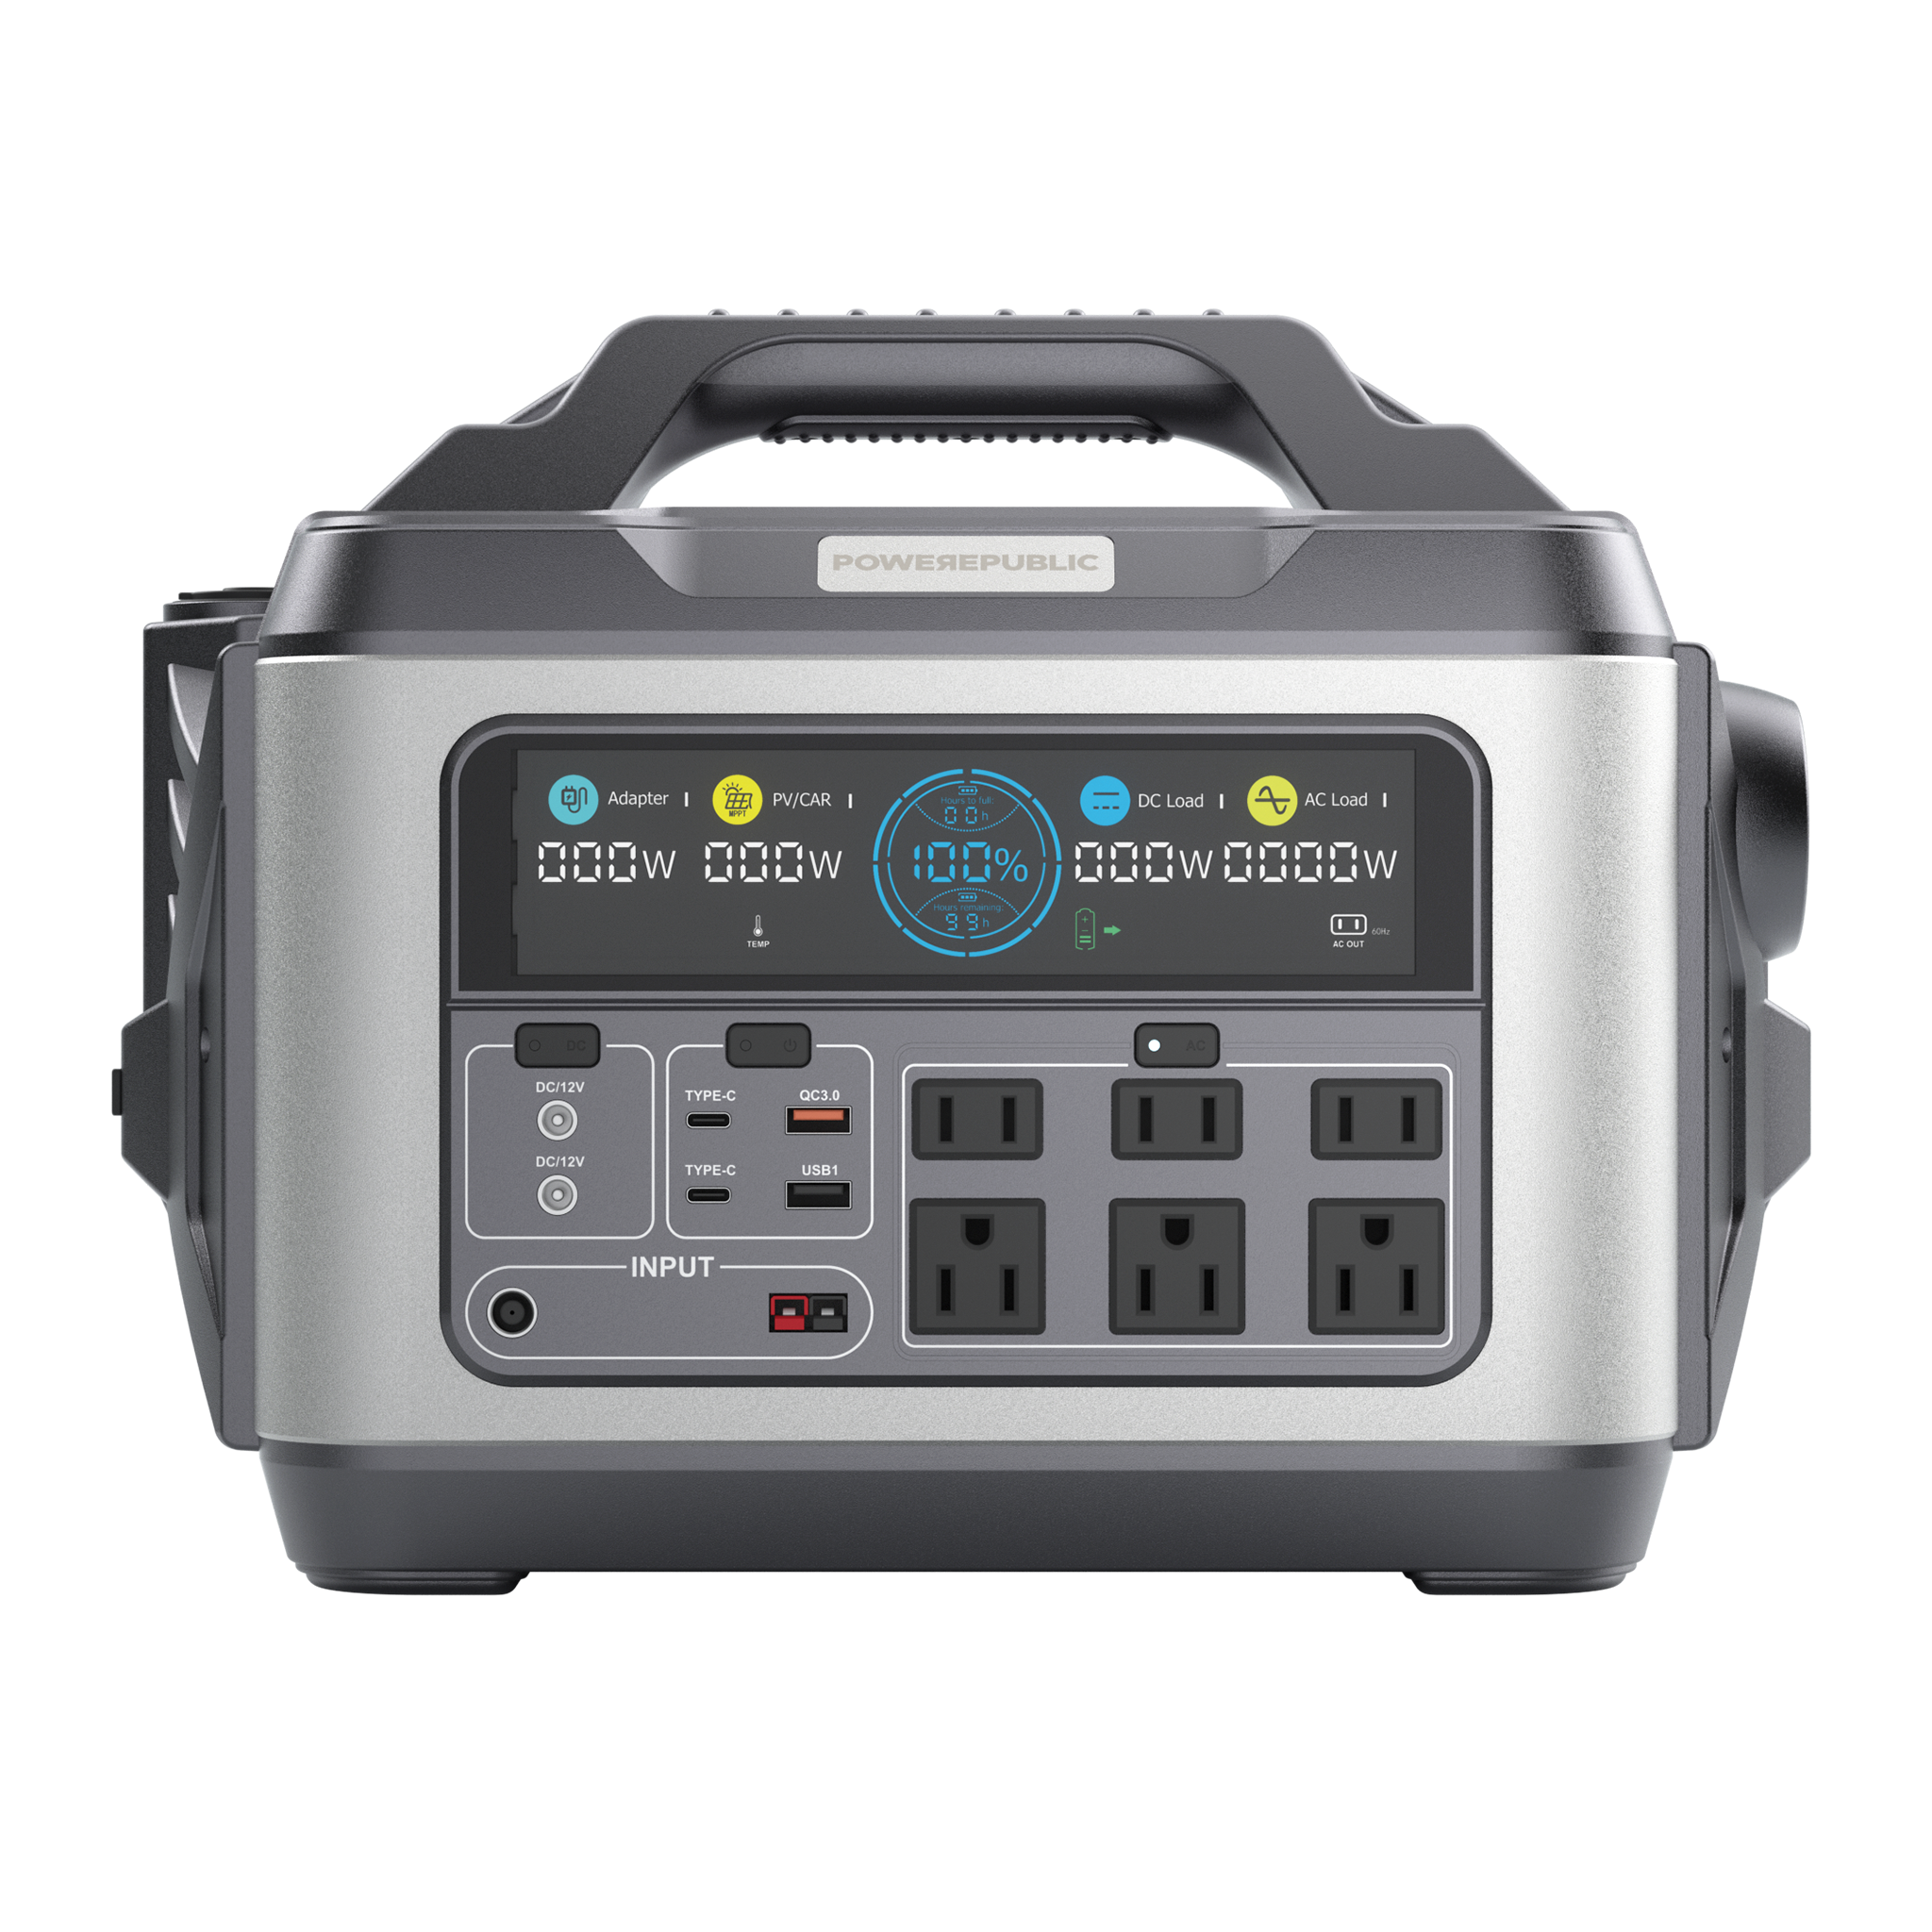 POWEREPUBLIC T1200 portable power station, 1200W 1110Wh, metallic gray aluminum-alloy body with turbine-engine and aircraft wing design, a handle, an LCD screen, and input and output ports.